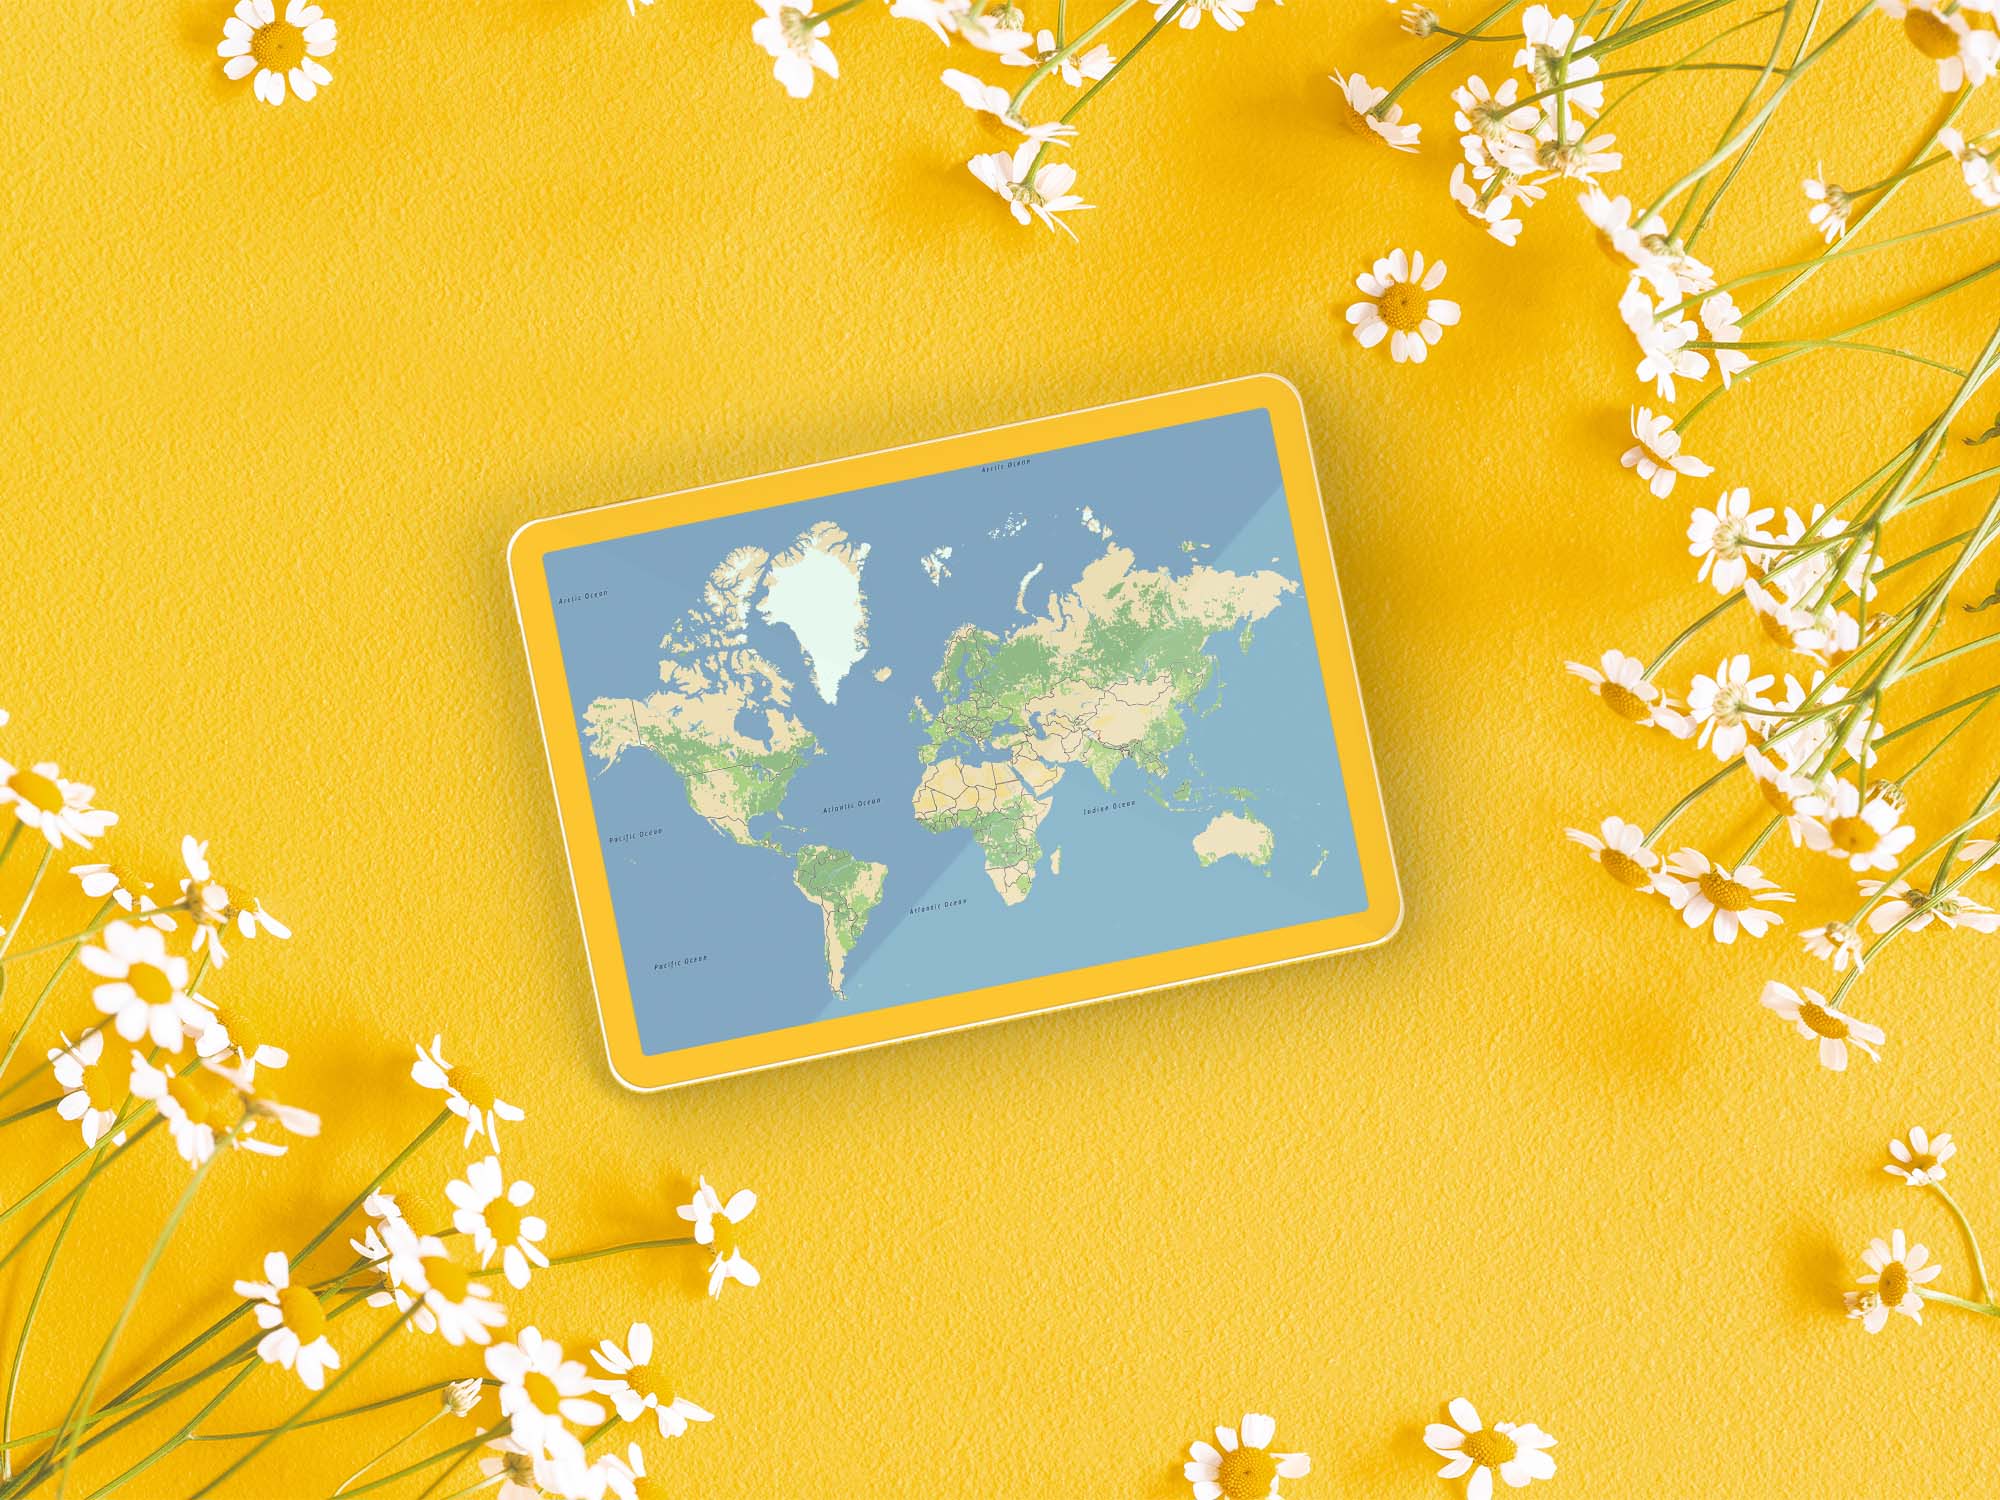 Tablet displaying a map, amidst a yellow background with flowers